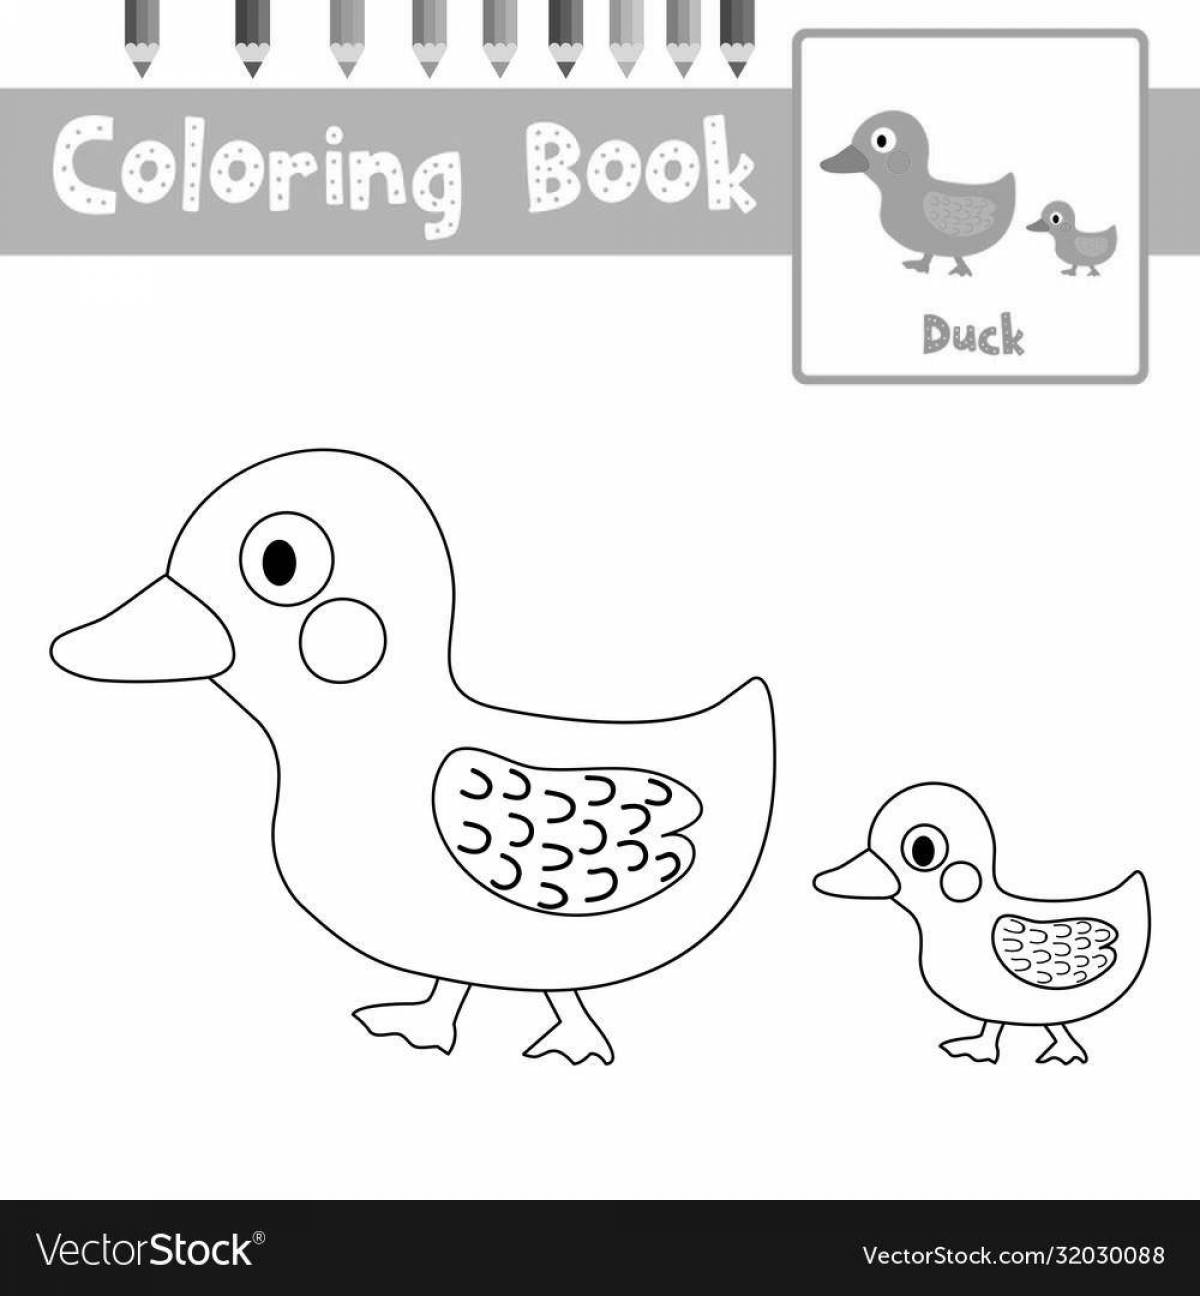 Adorable duck coloring book for kids